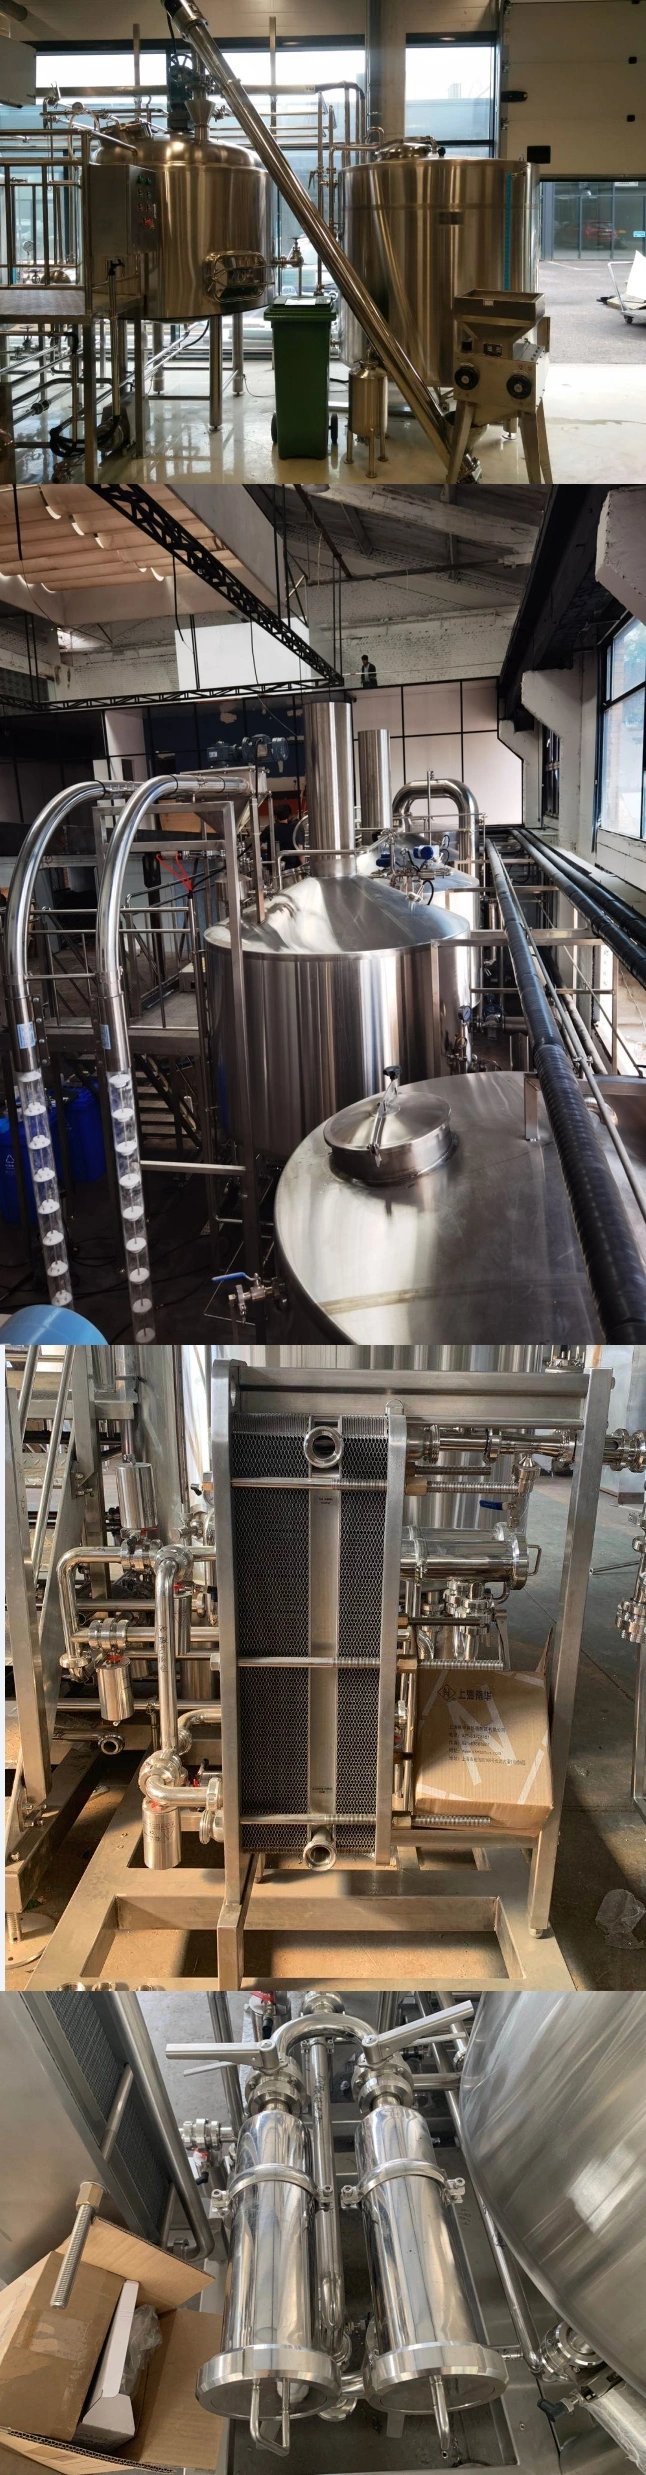 Small Brewery, Home Brew Kit, Hobby Brewing Machine